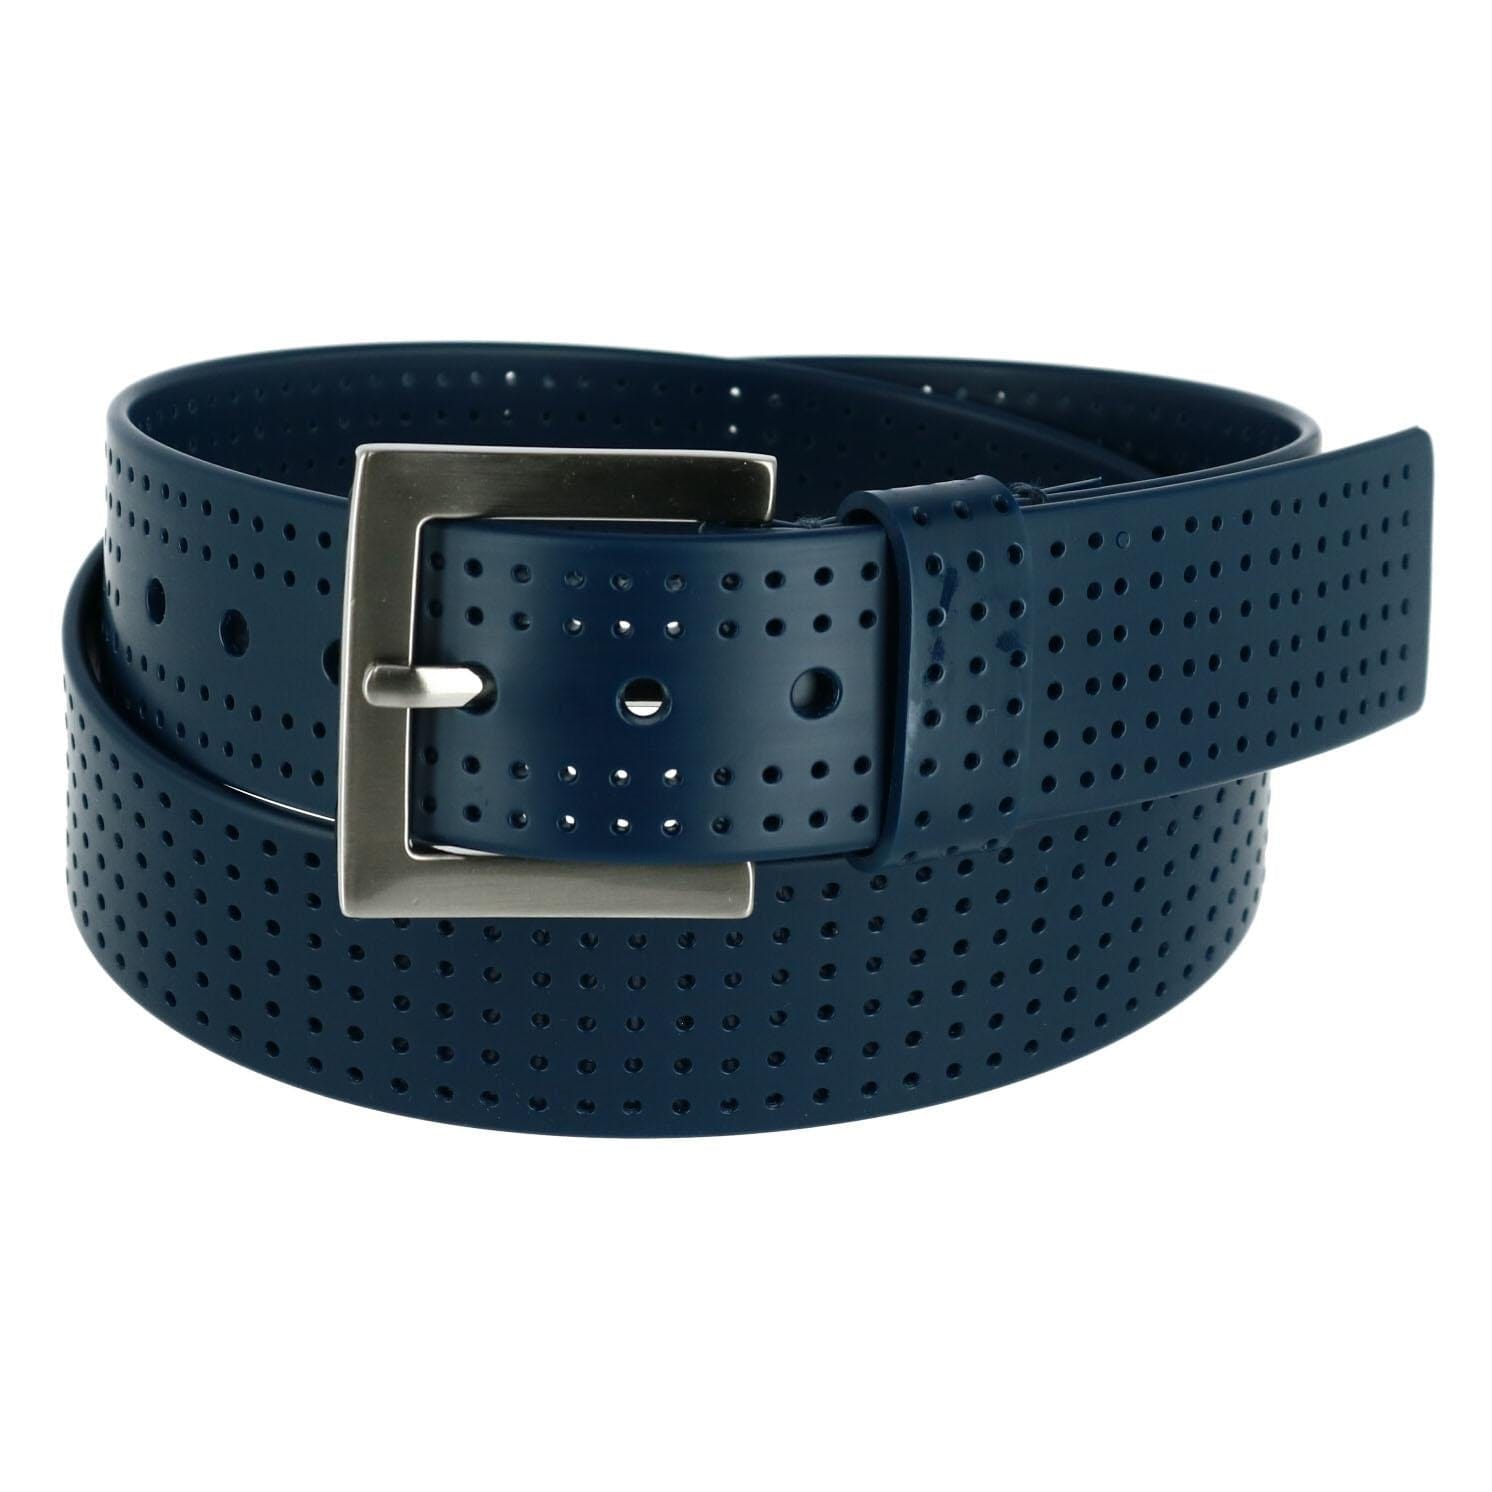 Men's Silicone Perforated Golf Belt by Pebble Beach